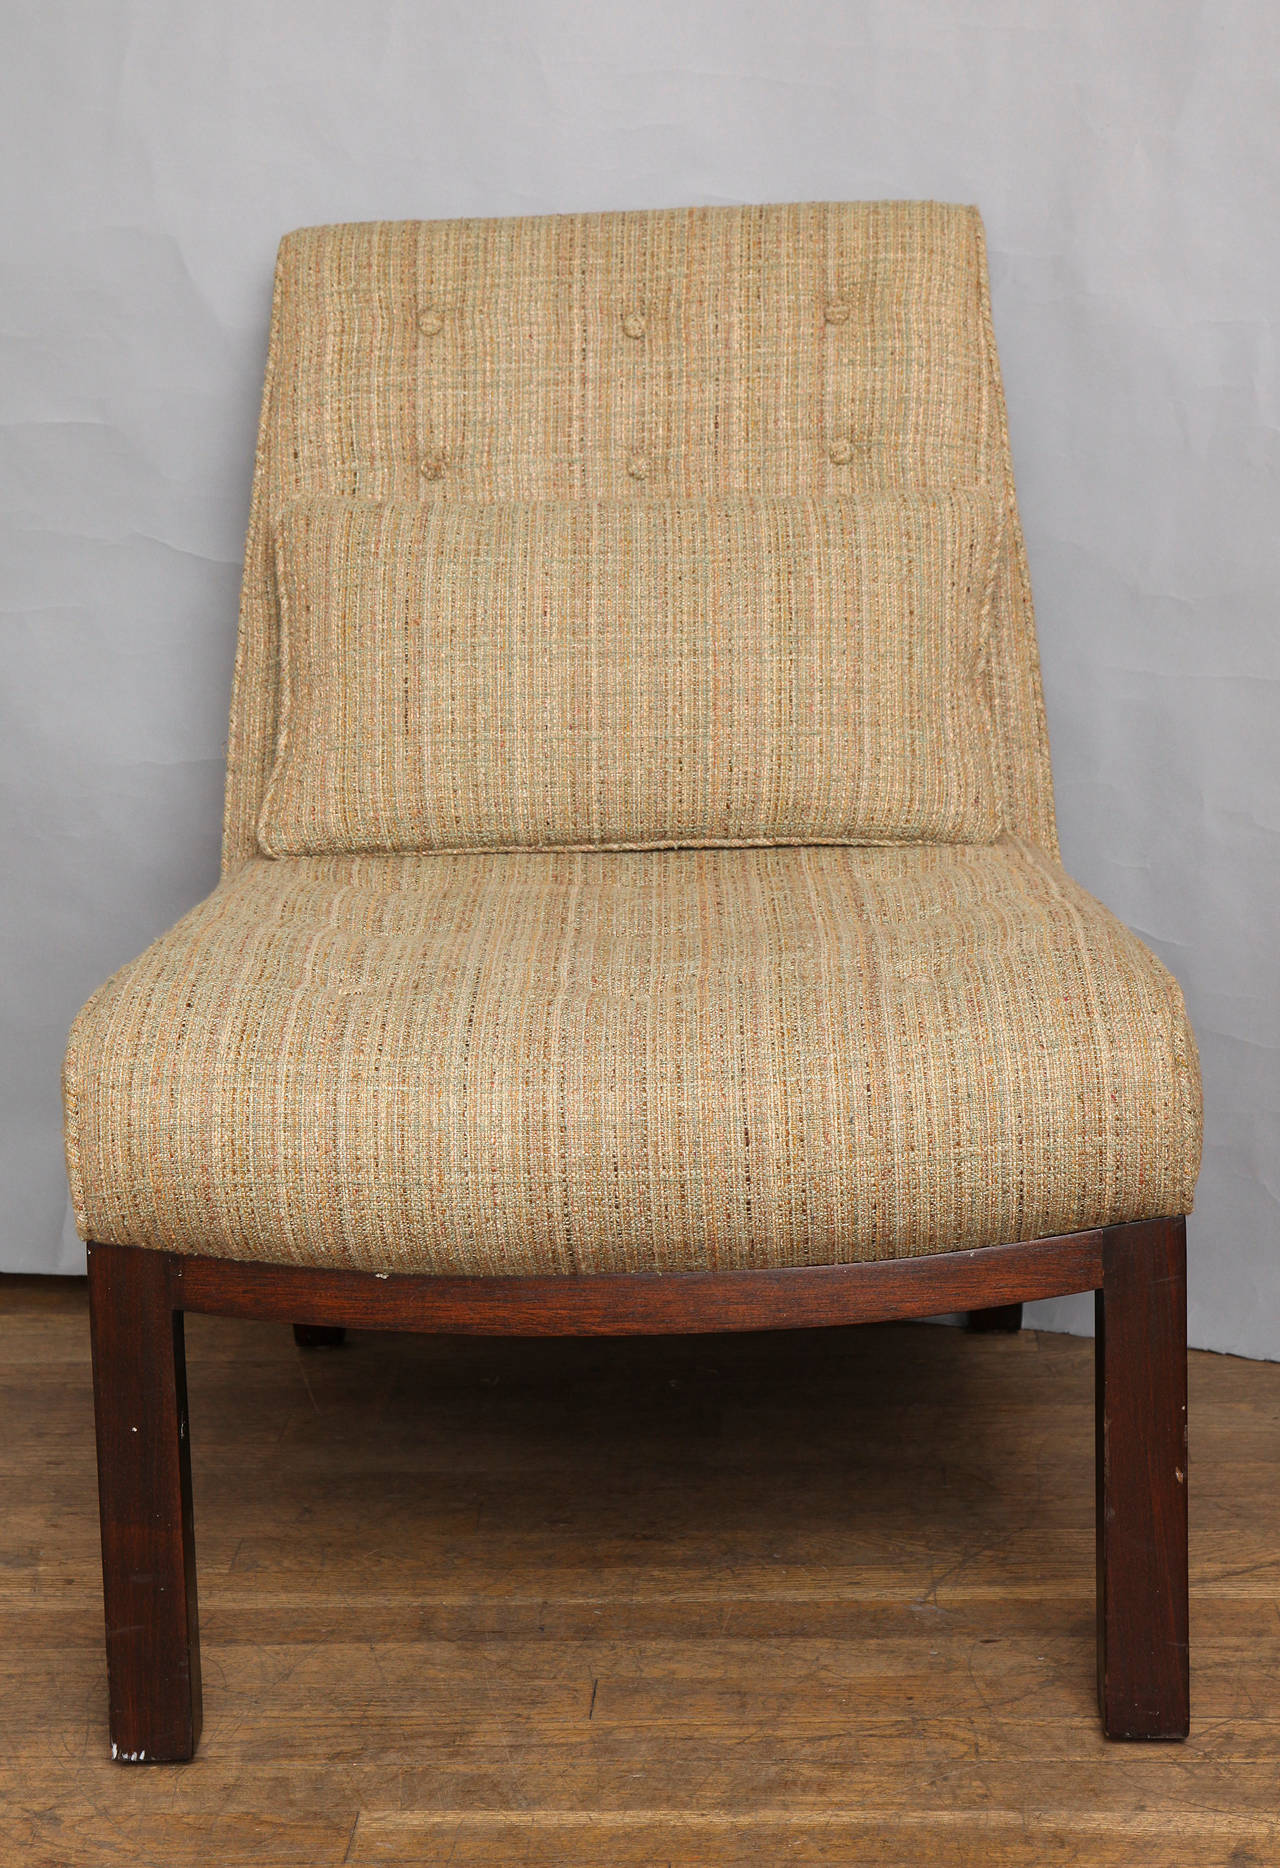 A Pair of Mid-Century Modern Edward Wormley for Dunbar Slipper Chairs For Sale 3